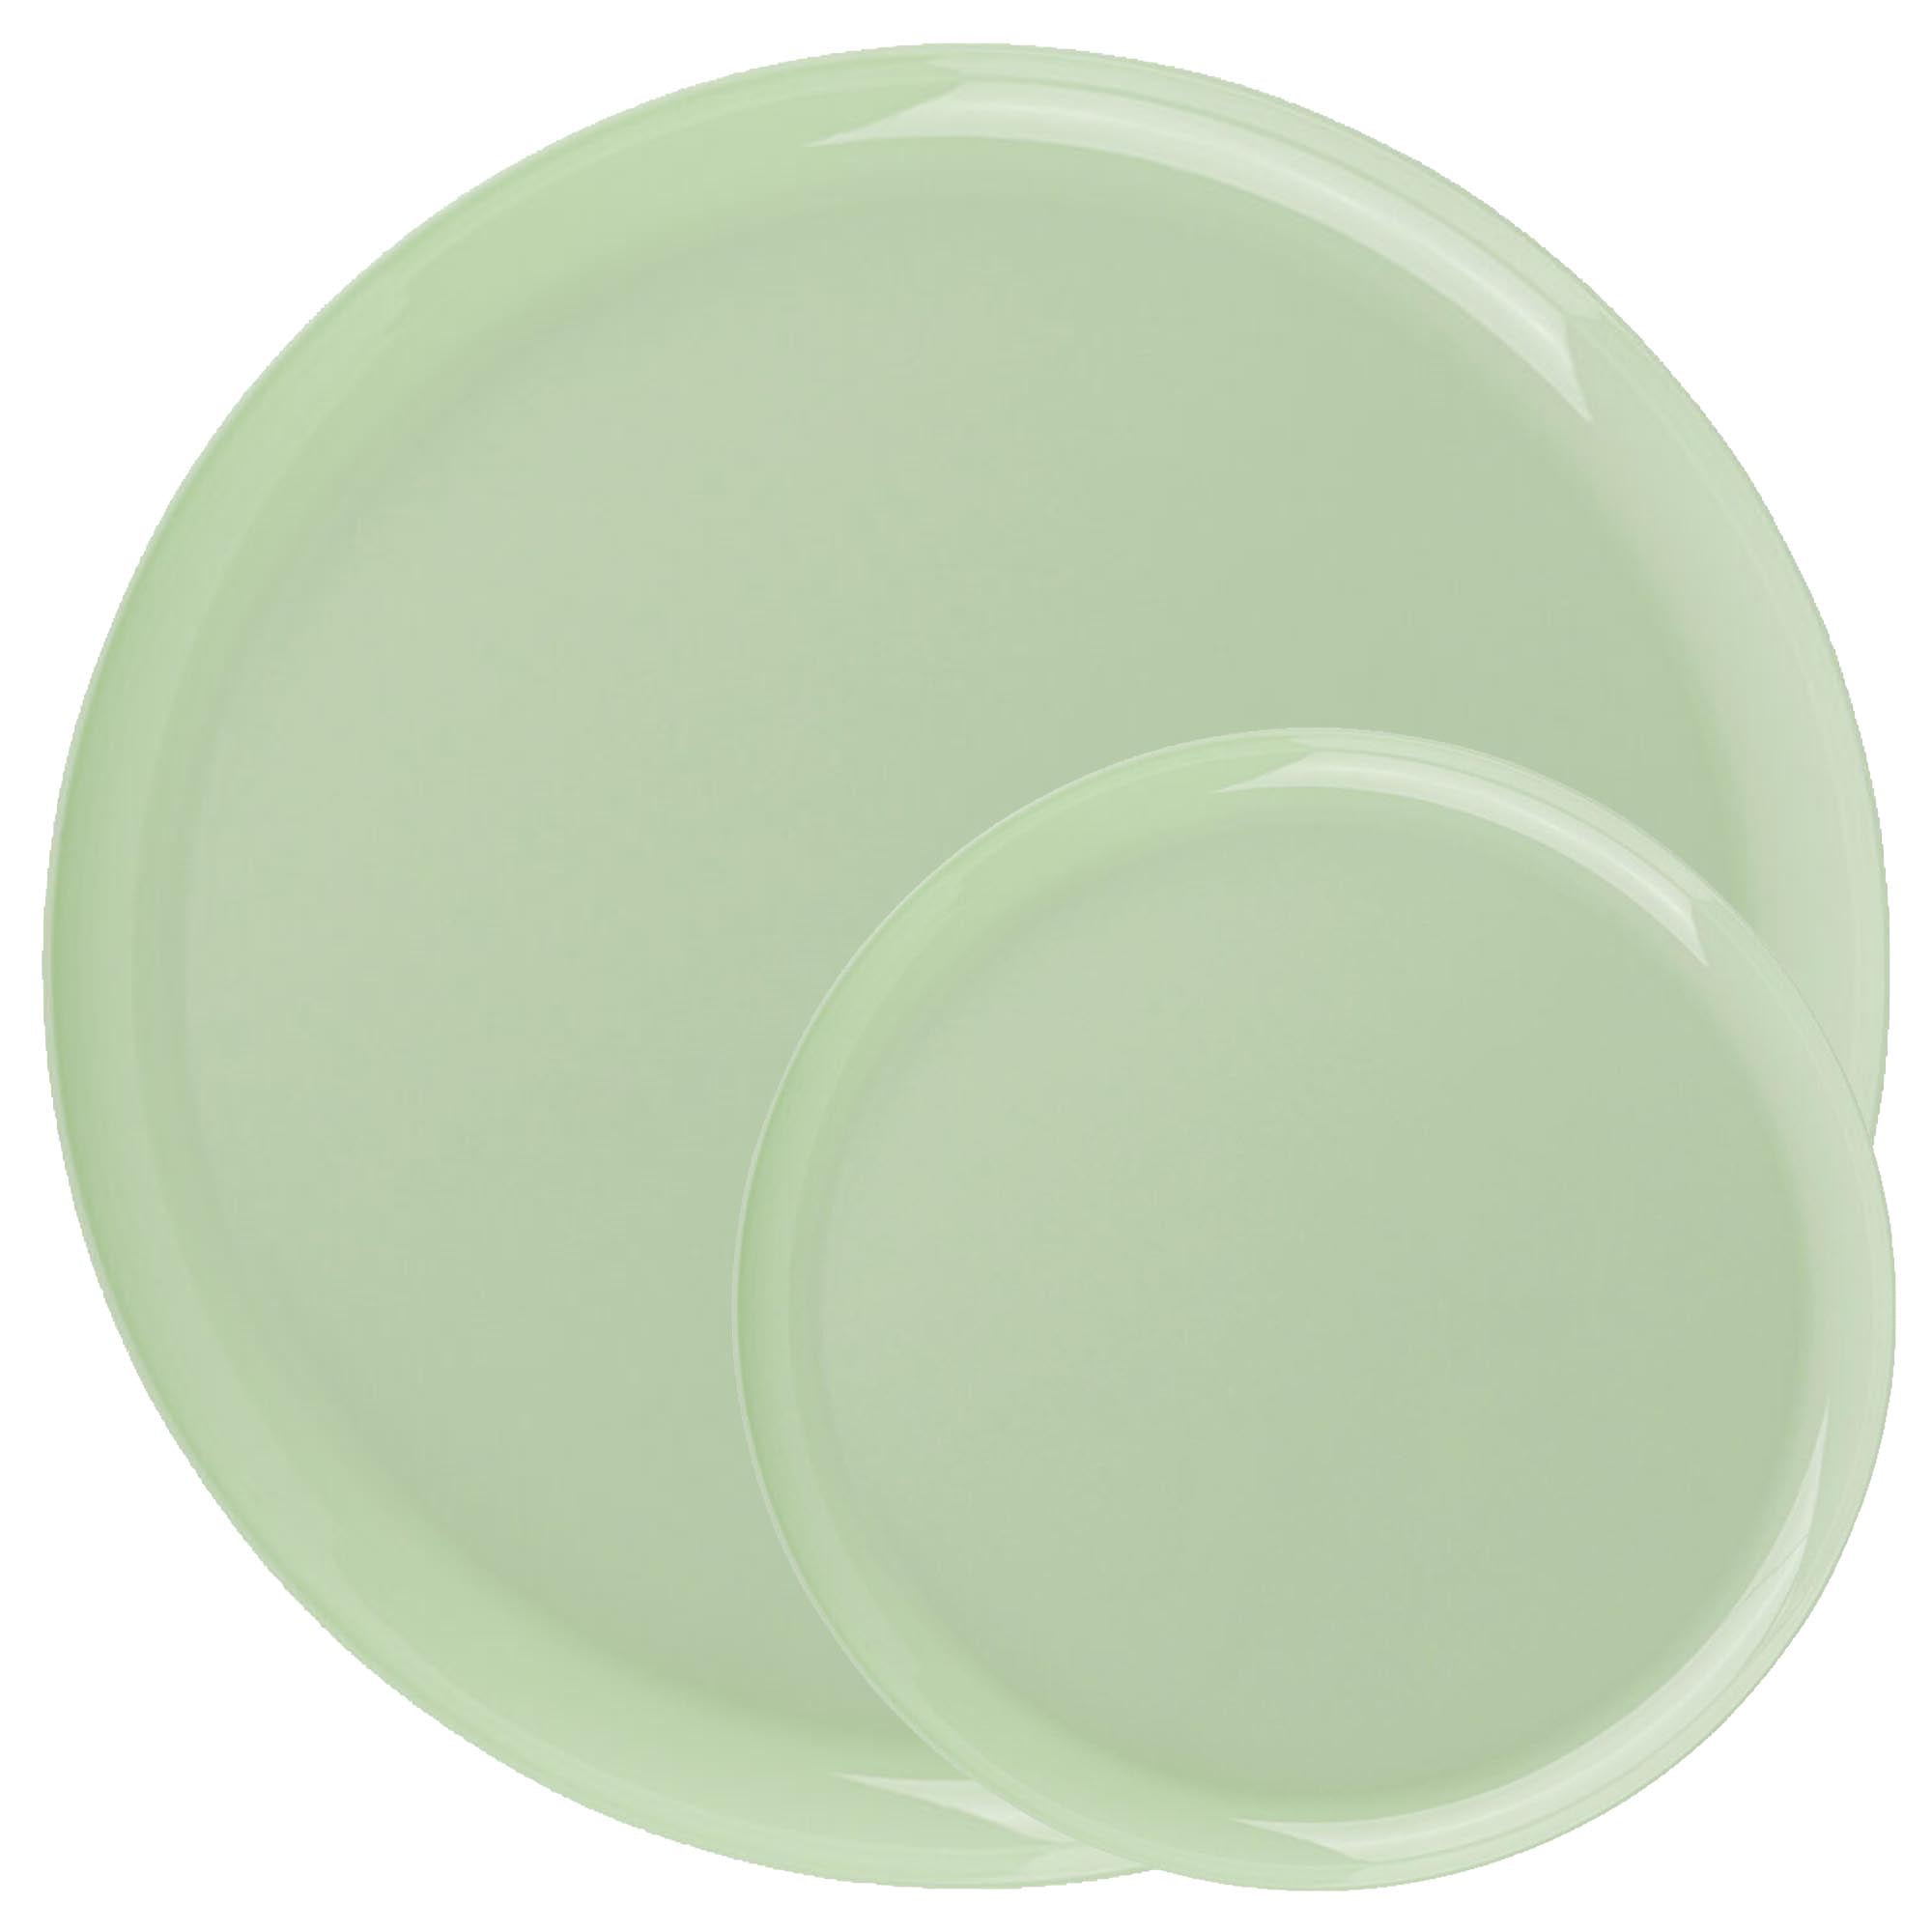 Plastic Tableware Mint Green Plates Edge Collection Dinner Party Set